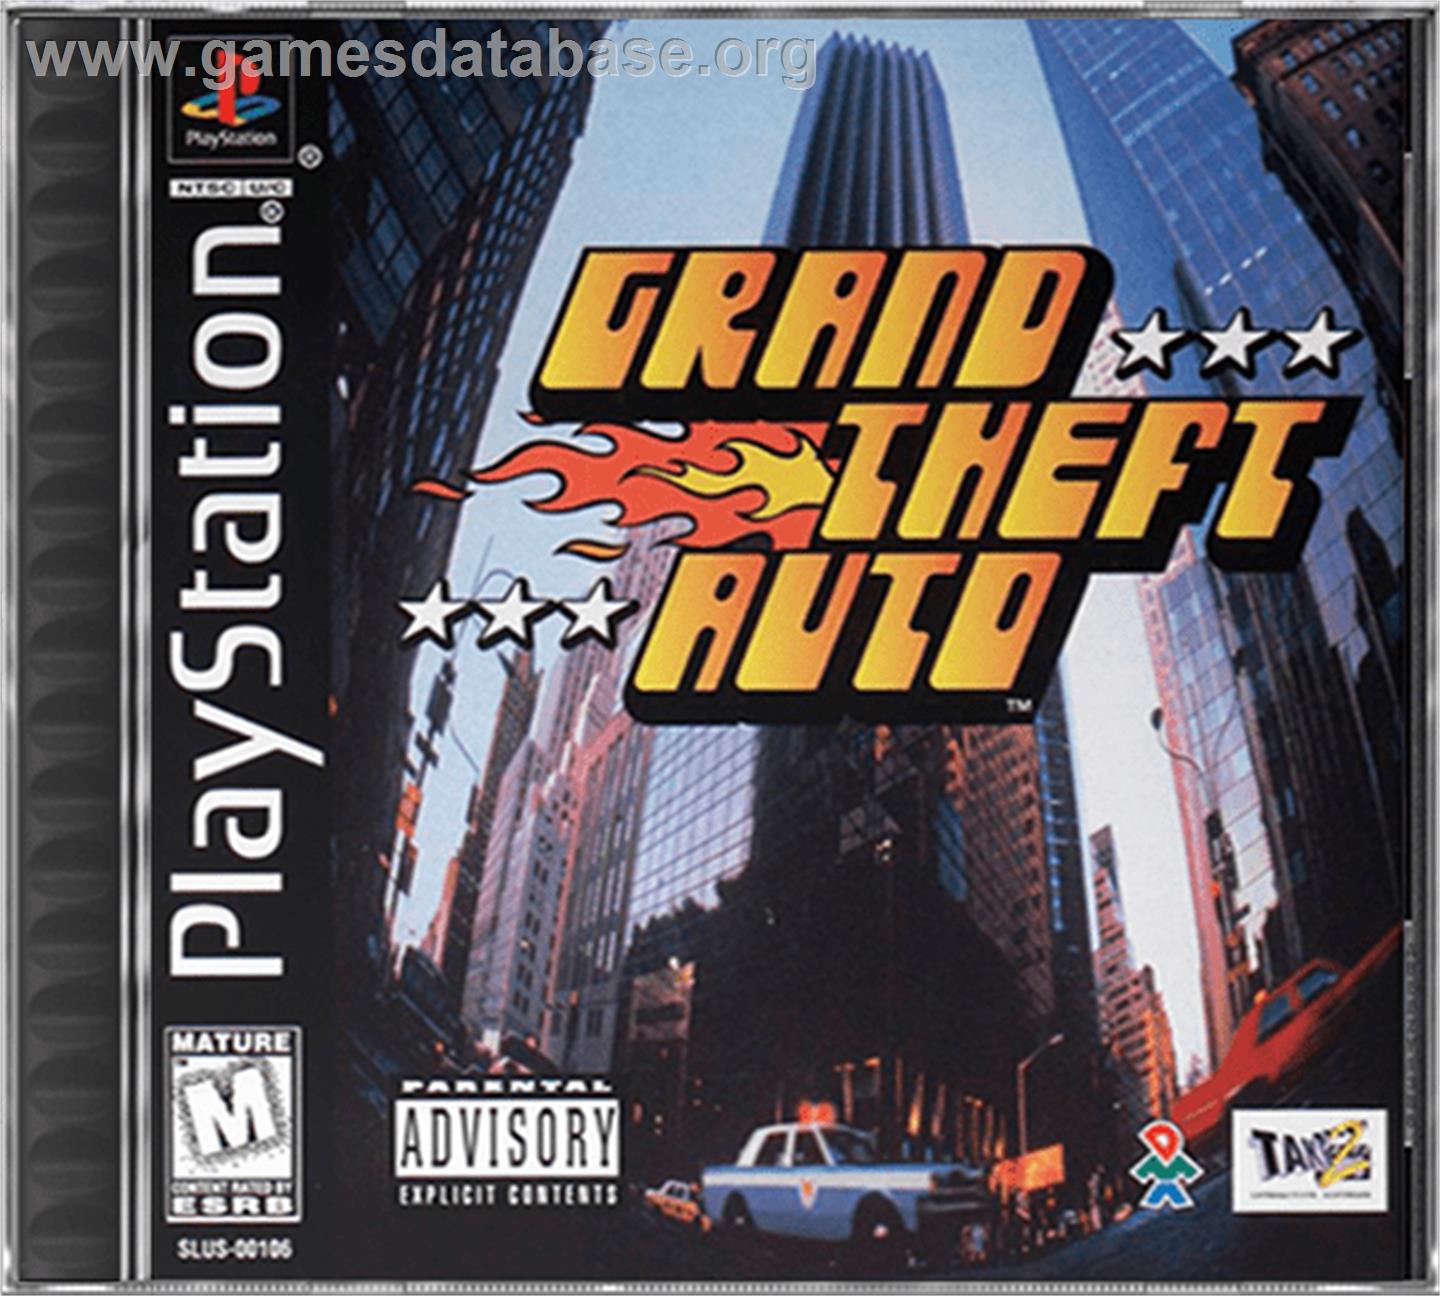 Grand Theft Auto: The Classics Collection - Sony Playstation - Artwork - Box